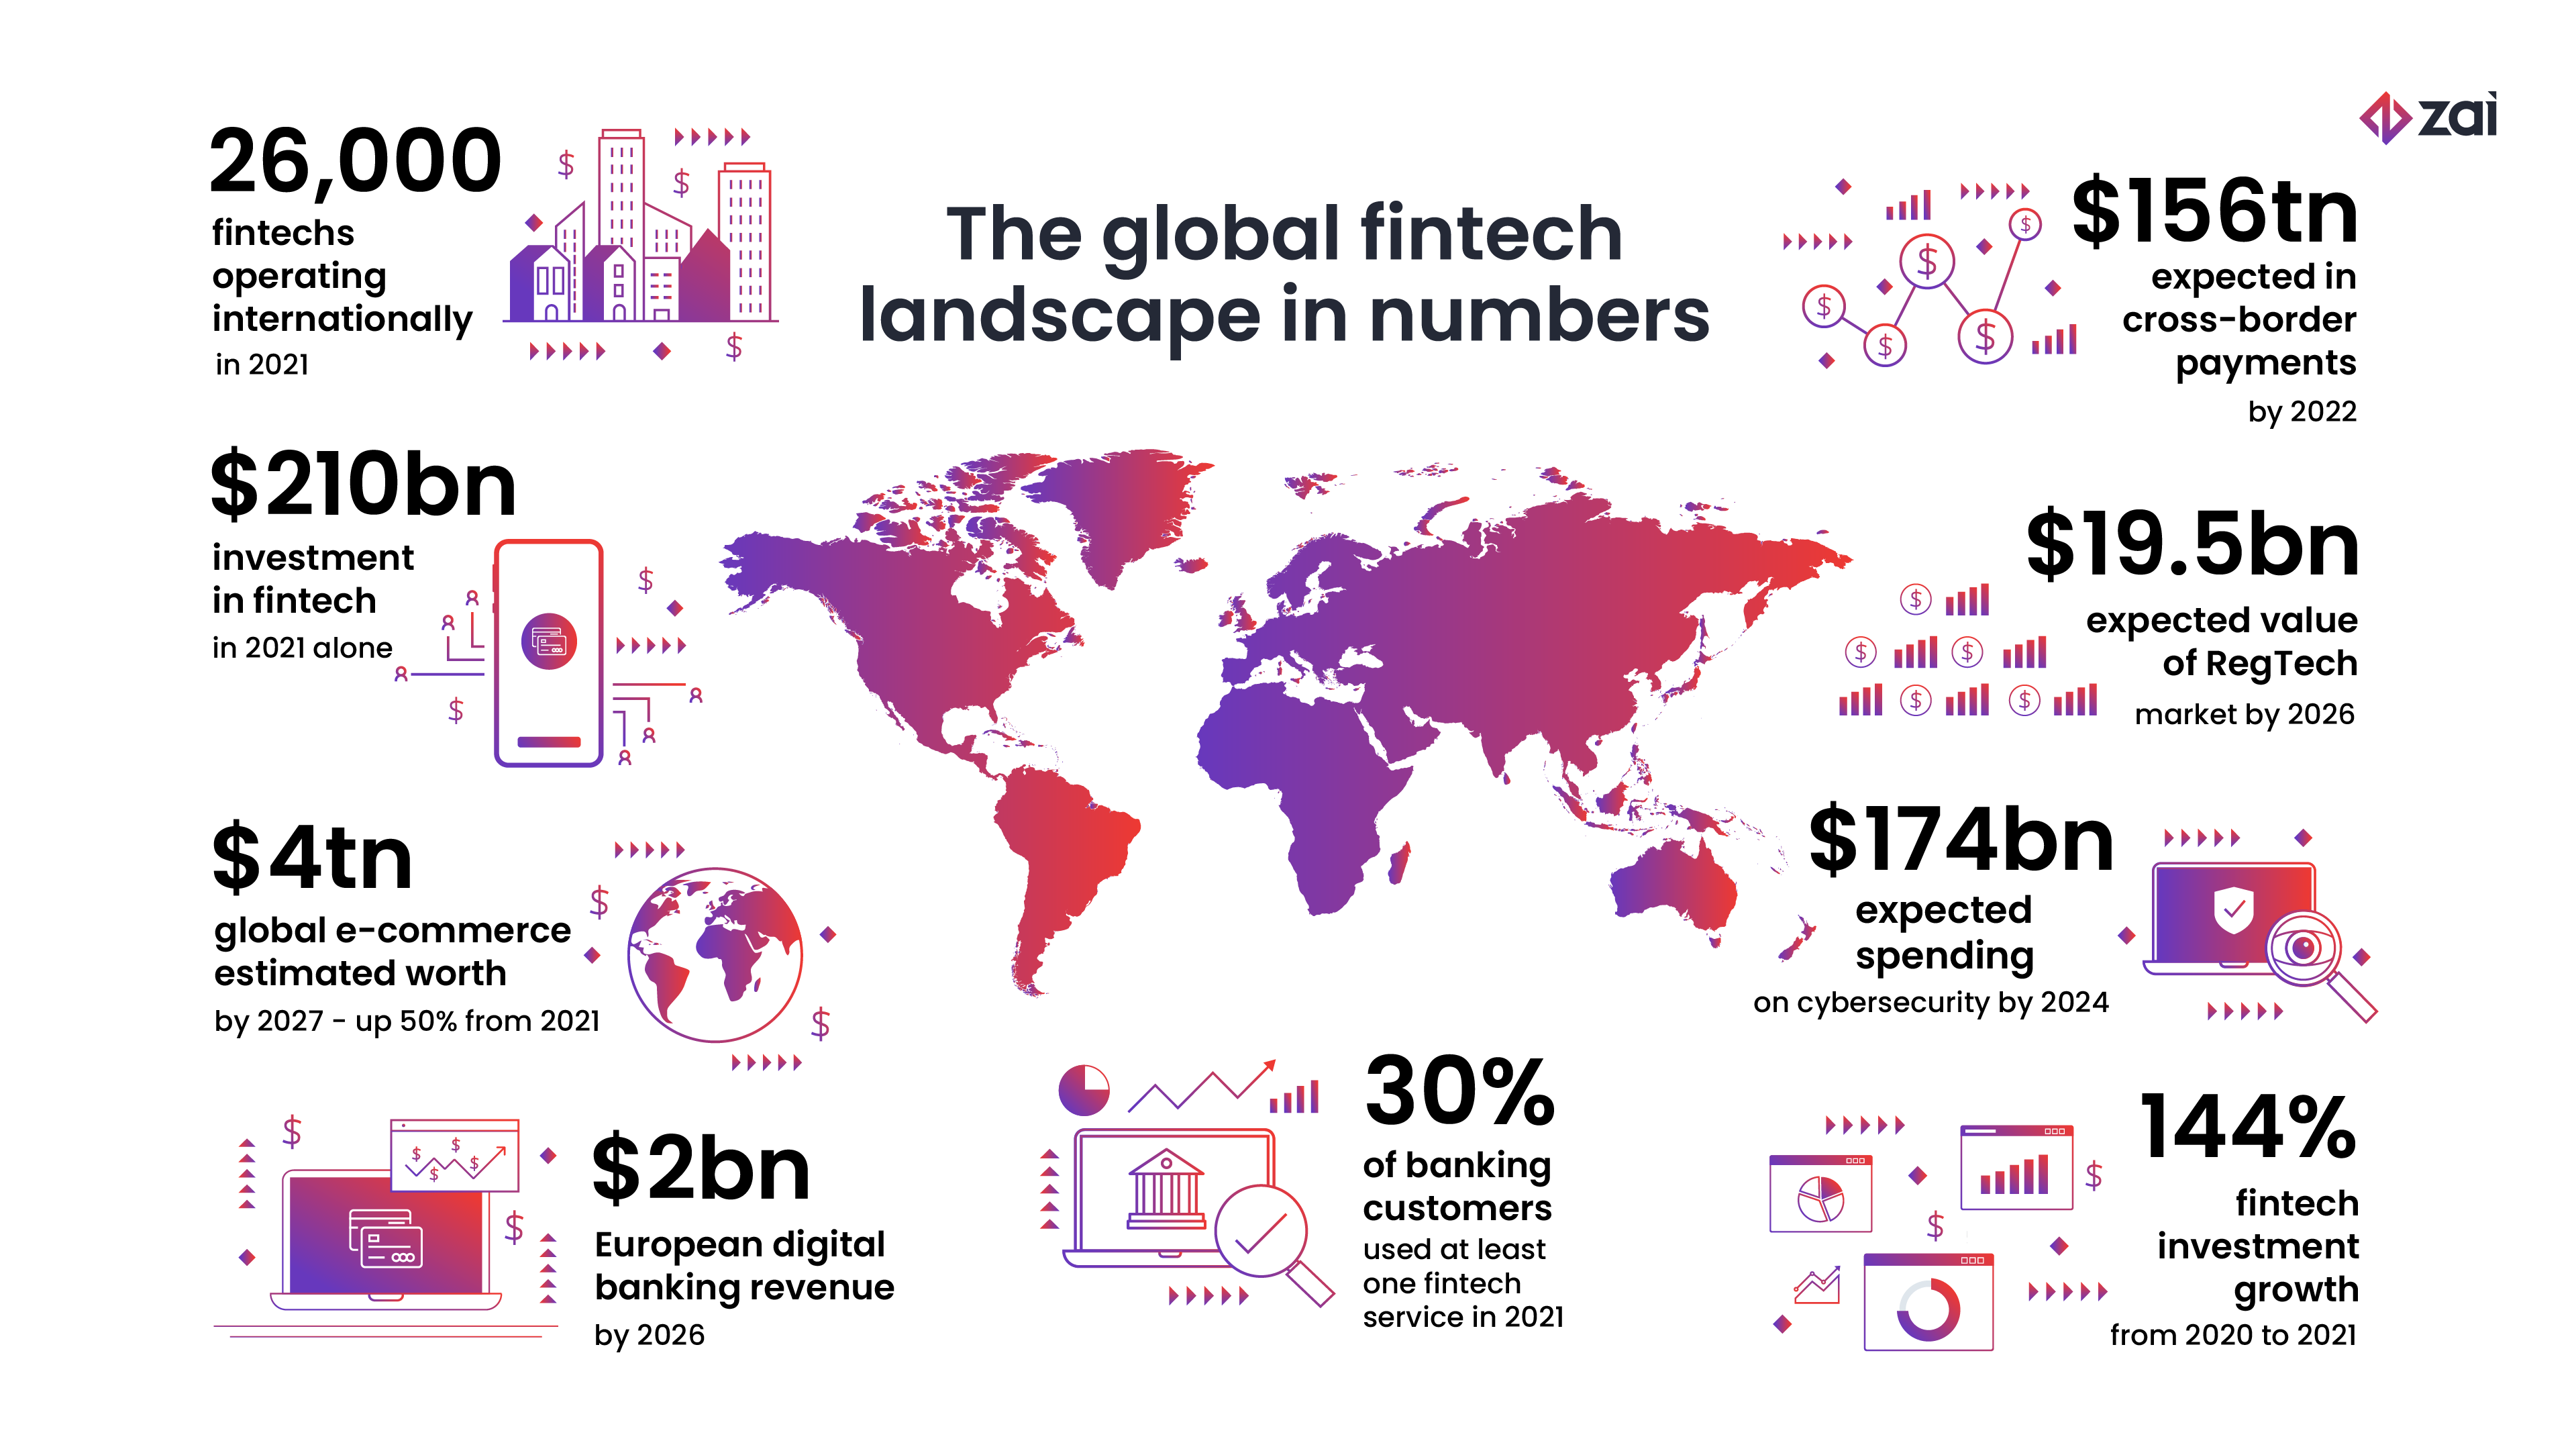 The outlook for the global financial technology (fintech) industry